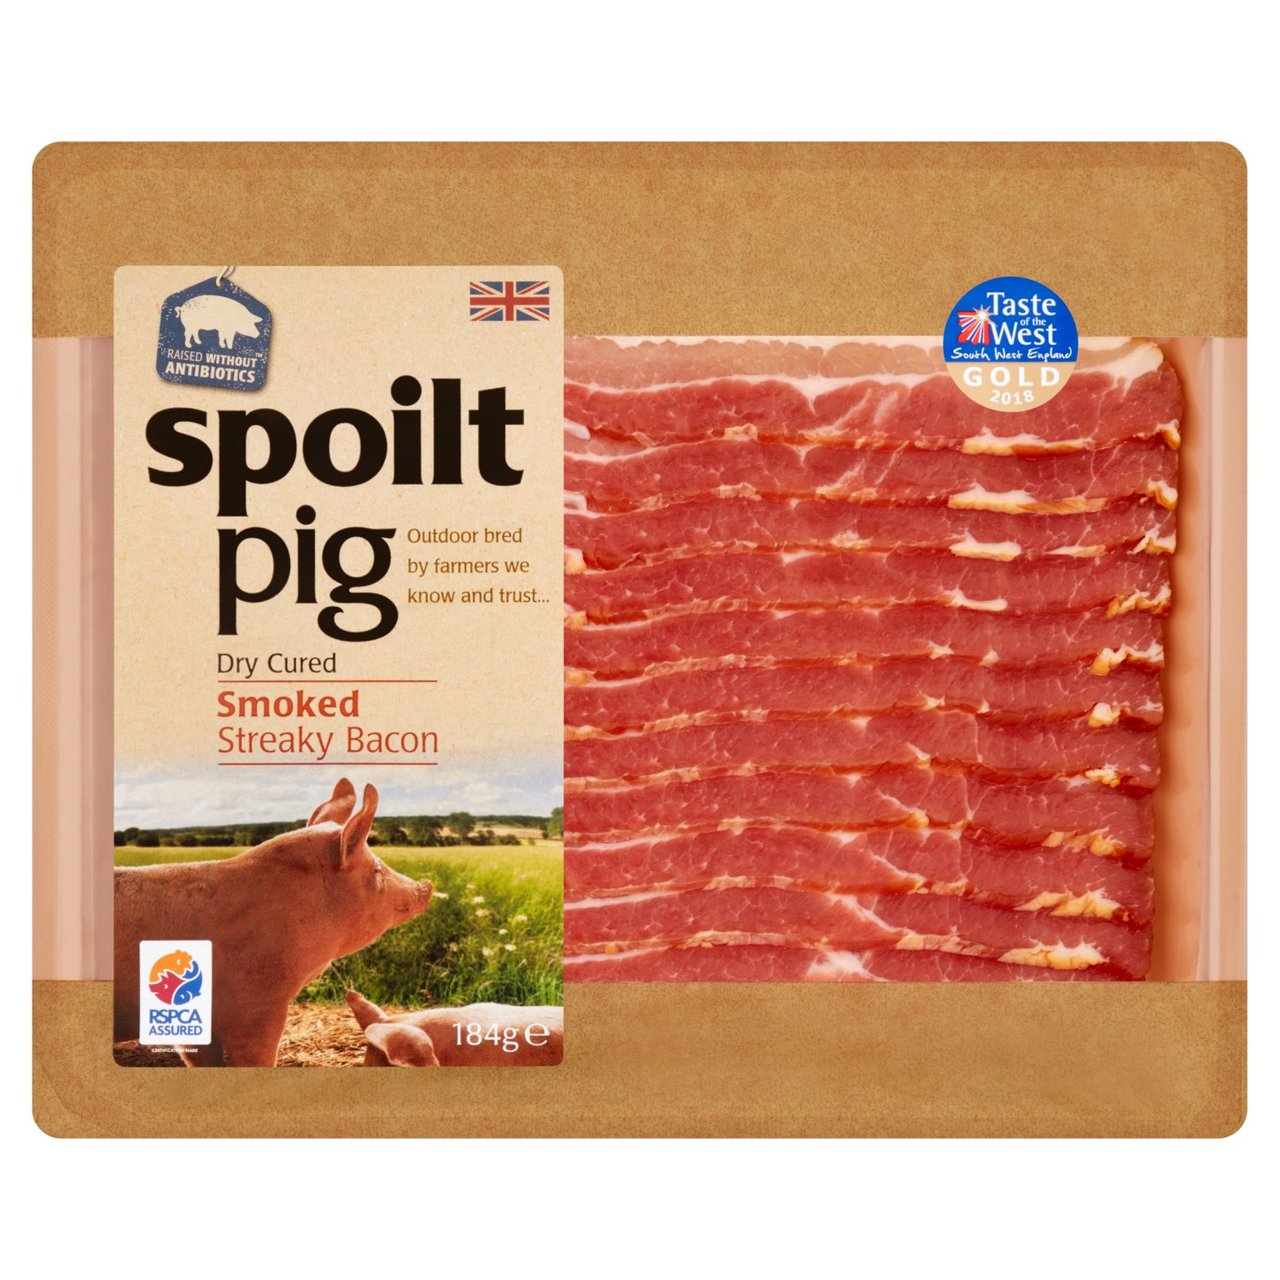 Spoiltpig Dry Cured Smoked Streaky Bacon 184g